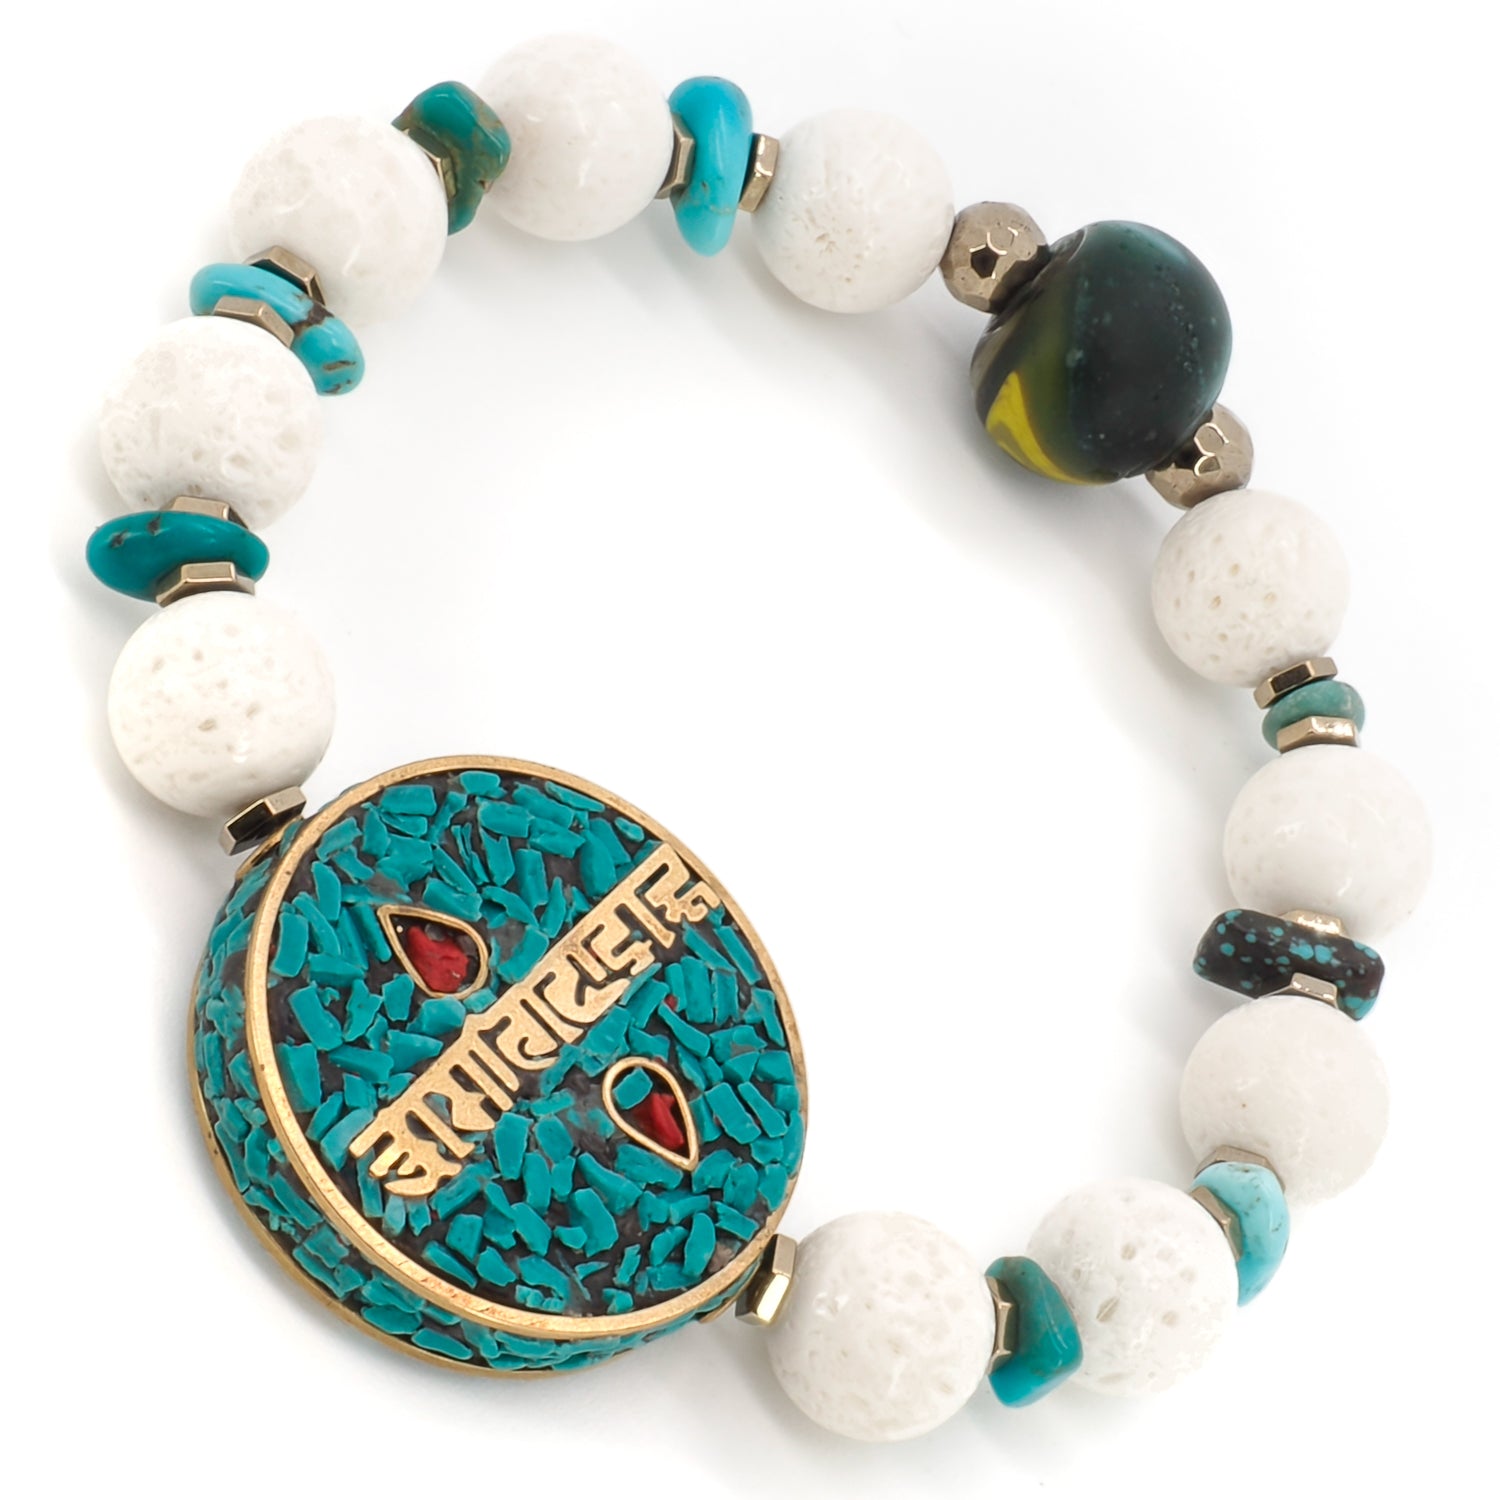 The OM Mani Mantra Bracelet is a symbol of spirituality and beauty, handcrafted to bring peace and positive energy.